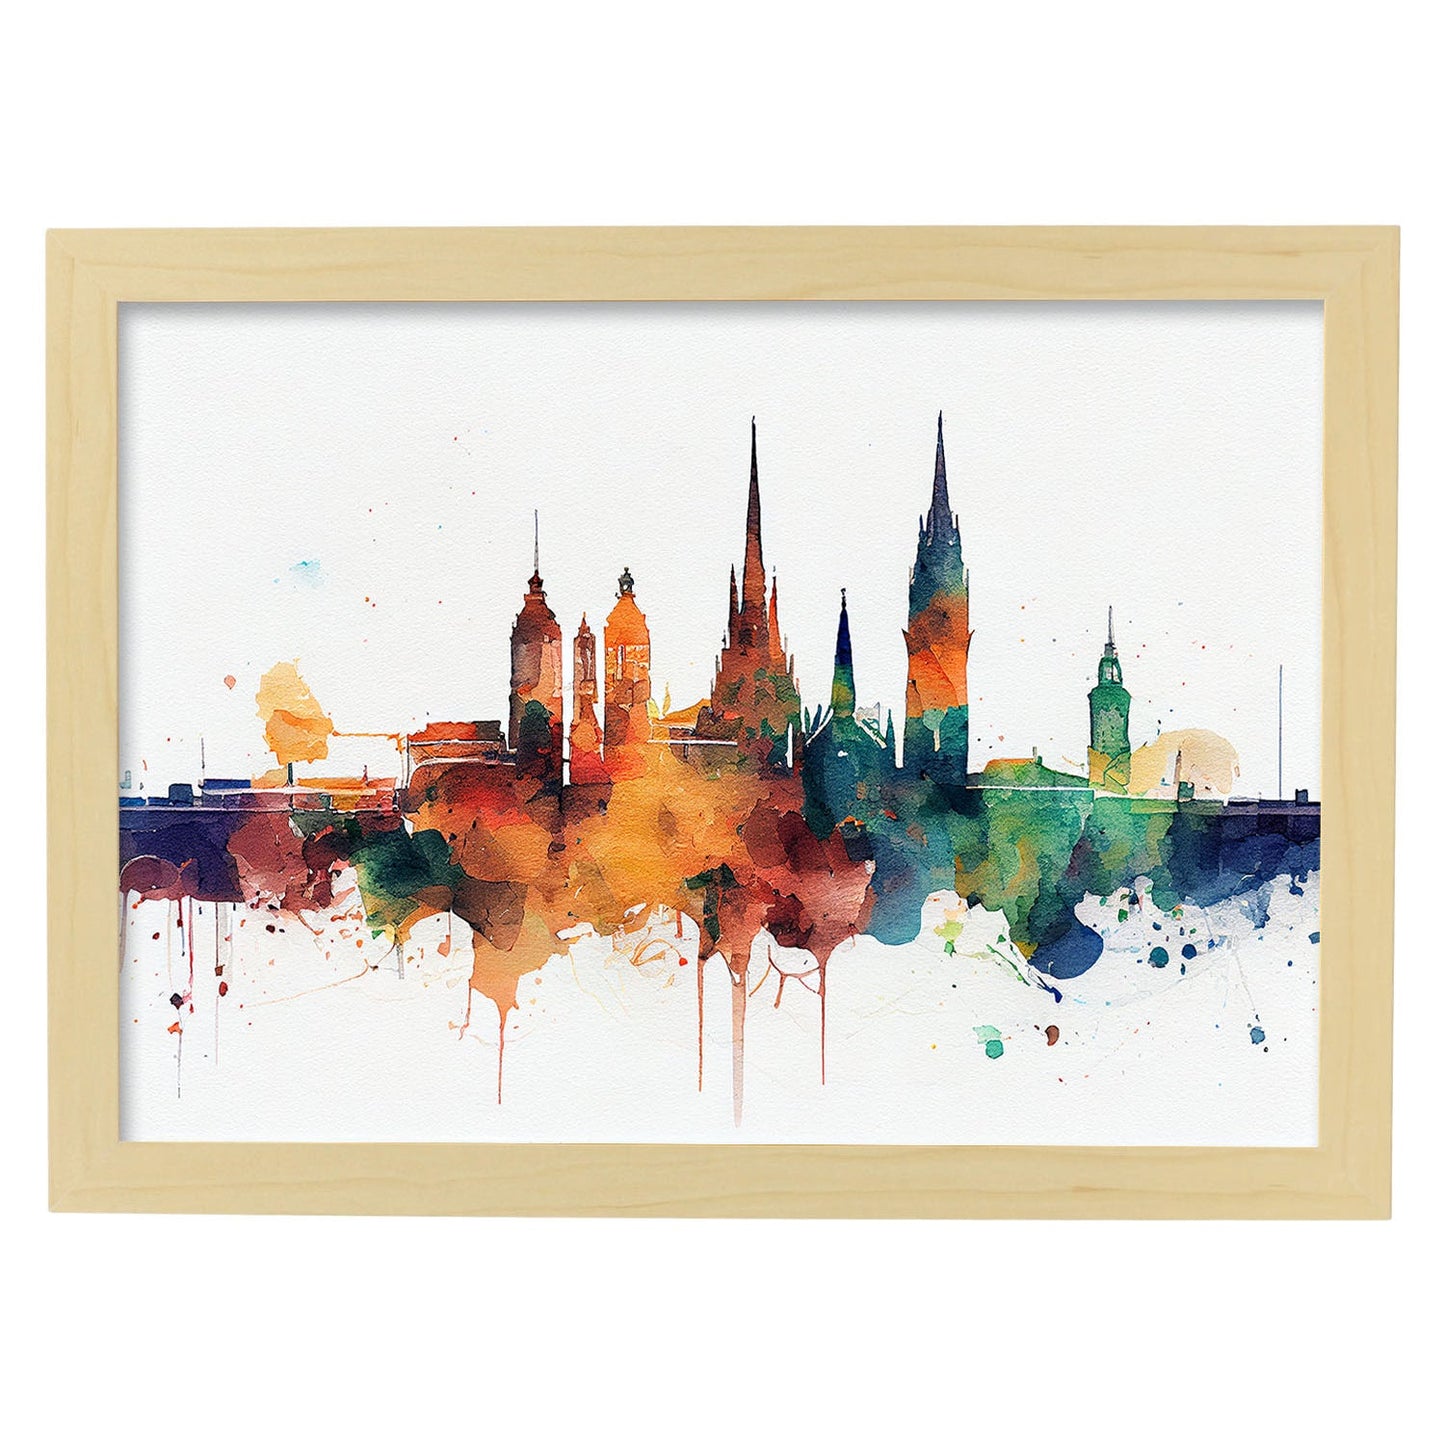 Nacnic watercolor of a skyline of the city of Vienna_1. Aesthetic Wall Art Prints for Bedroom or Living Room Design.-Artwork-Nacnic-A4-Marco Madera Clara-Nacnic Estudio SL